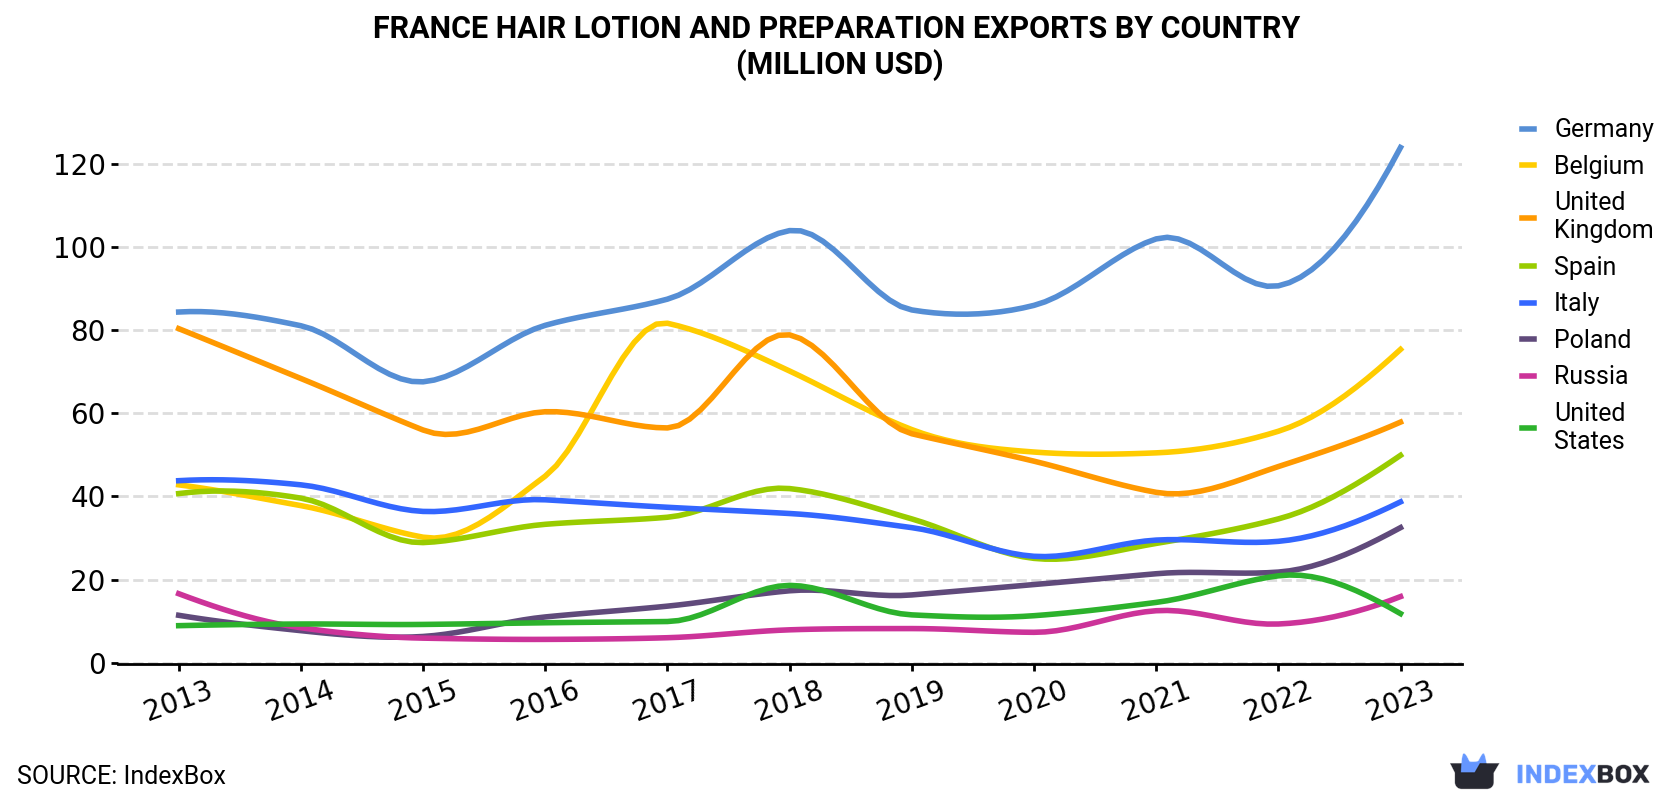 France Hair Lotion and Preparation Exports By Country (Million USD)